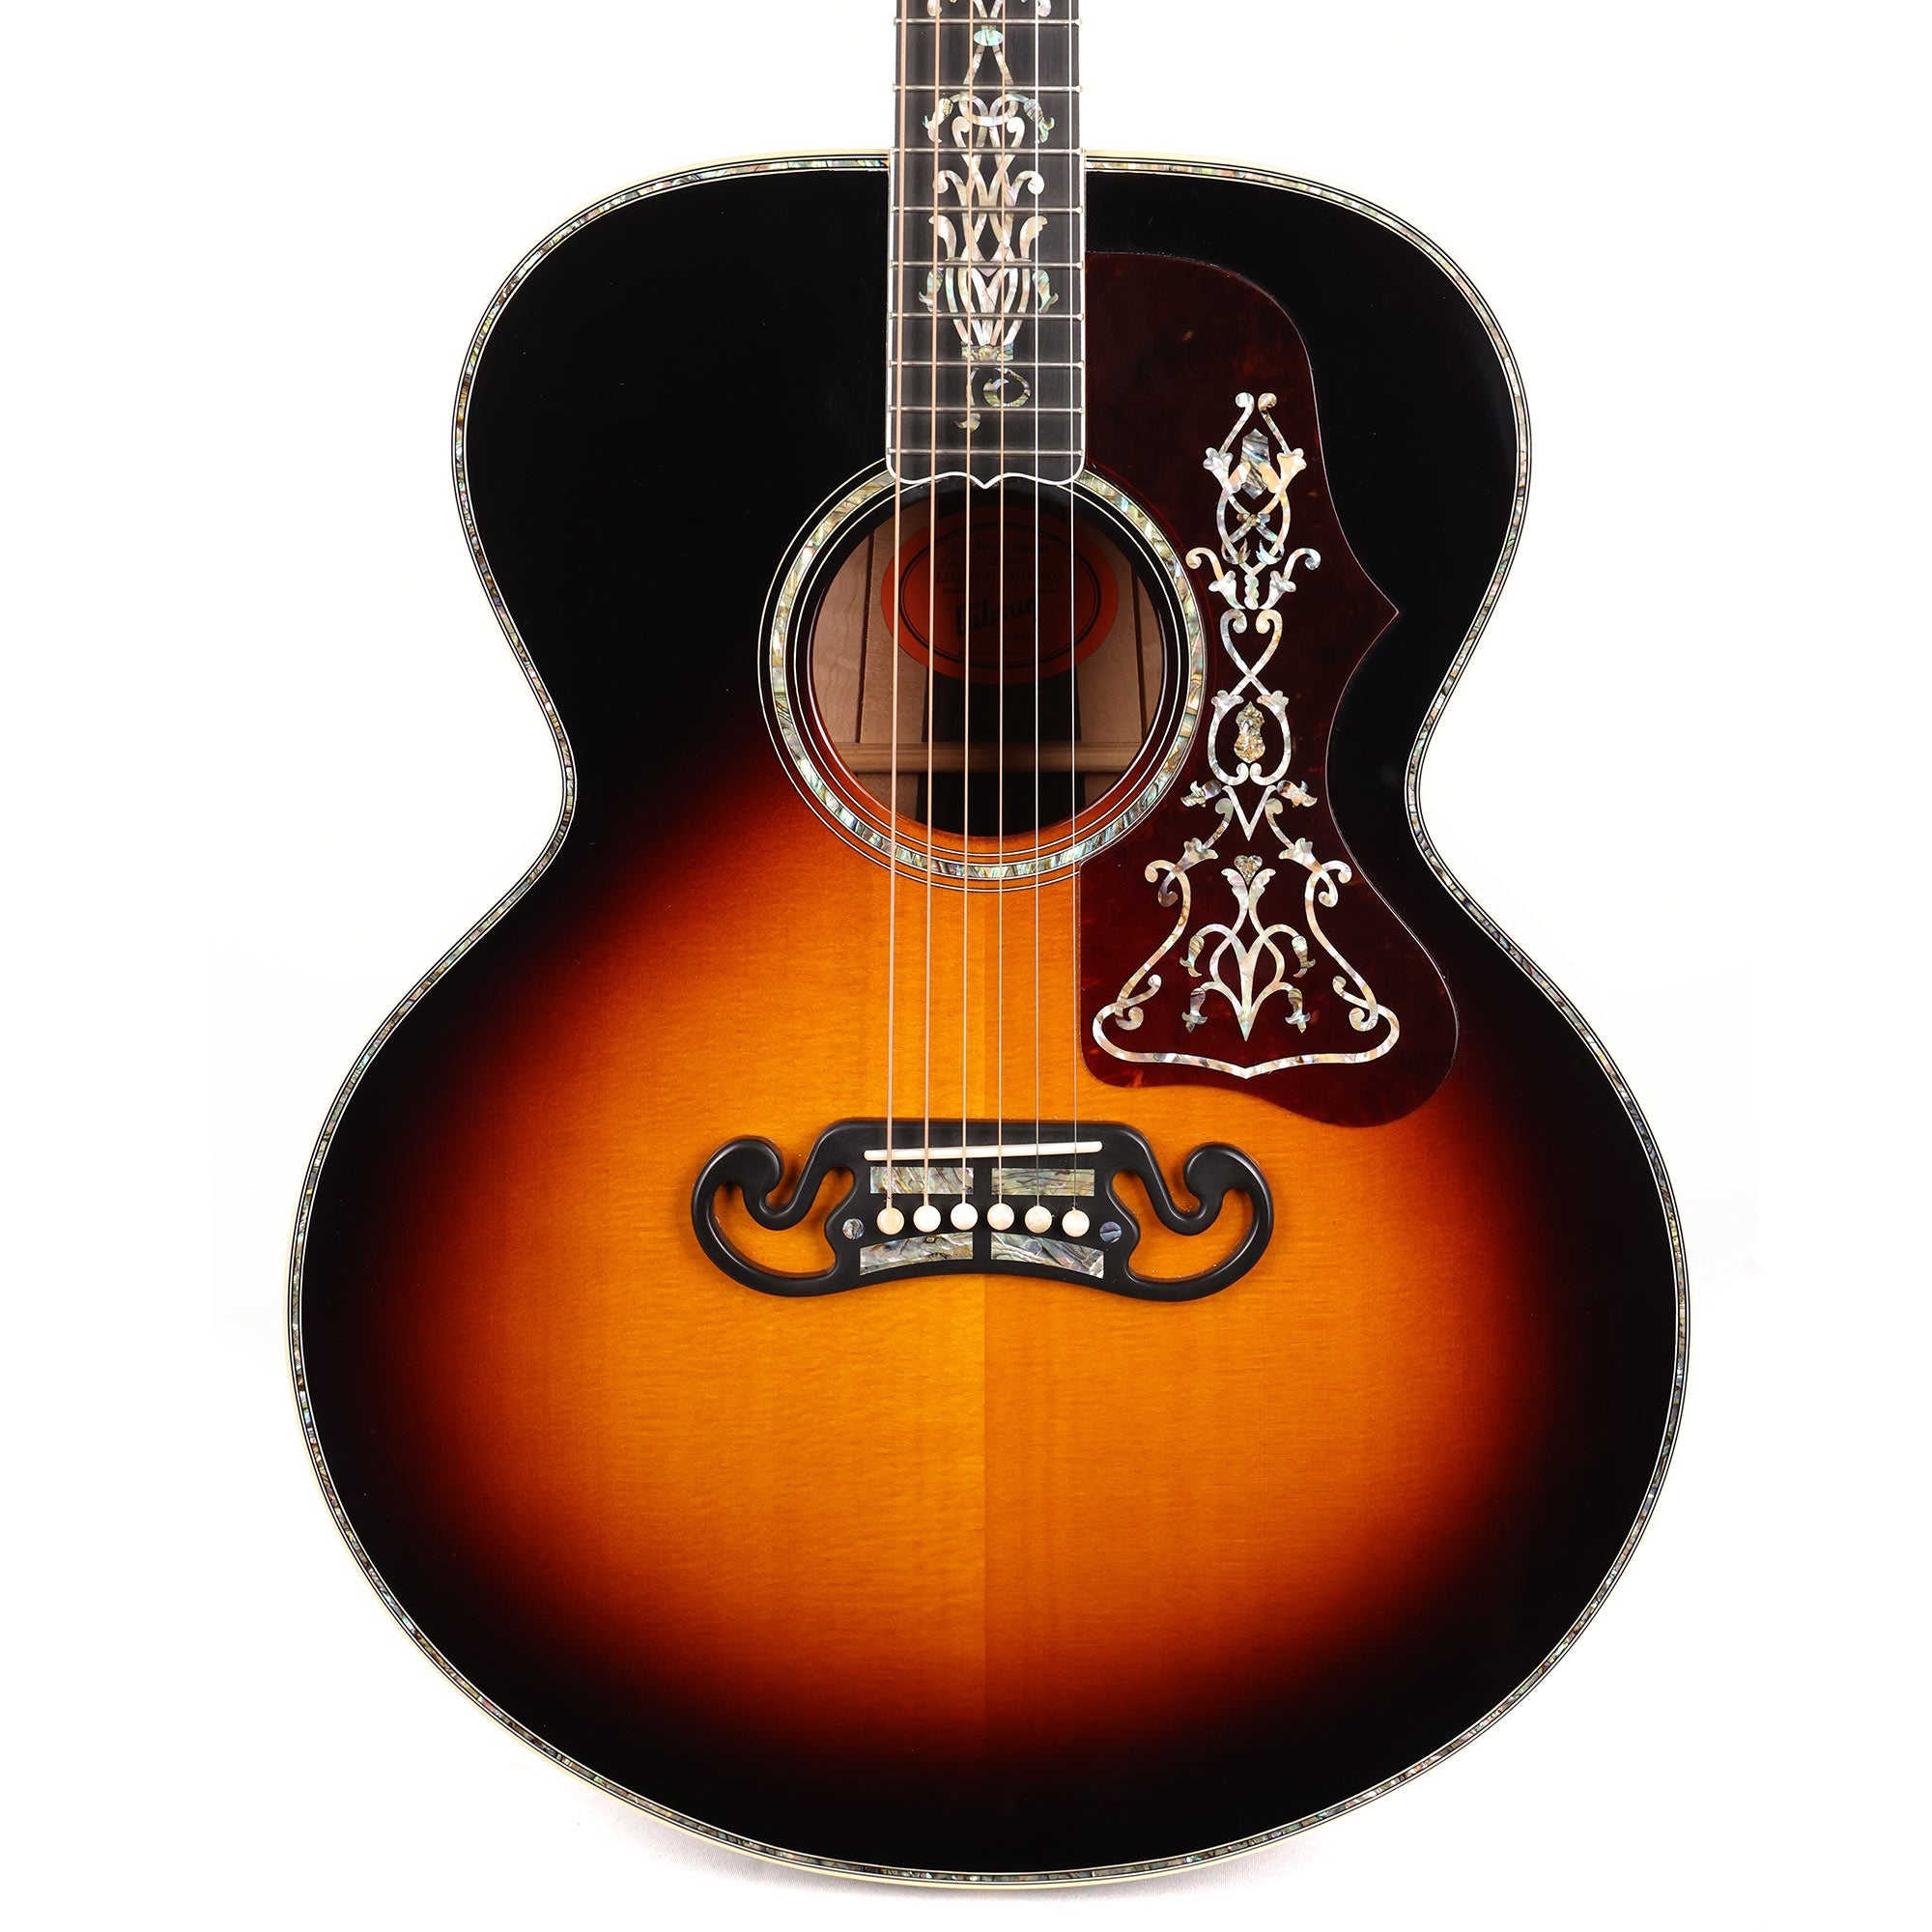 Gibson SJ-200 Gallery Edition Limited Acoustic Sunburst | The